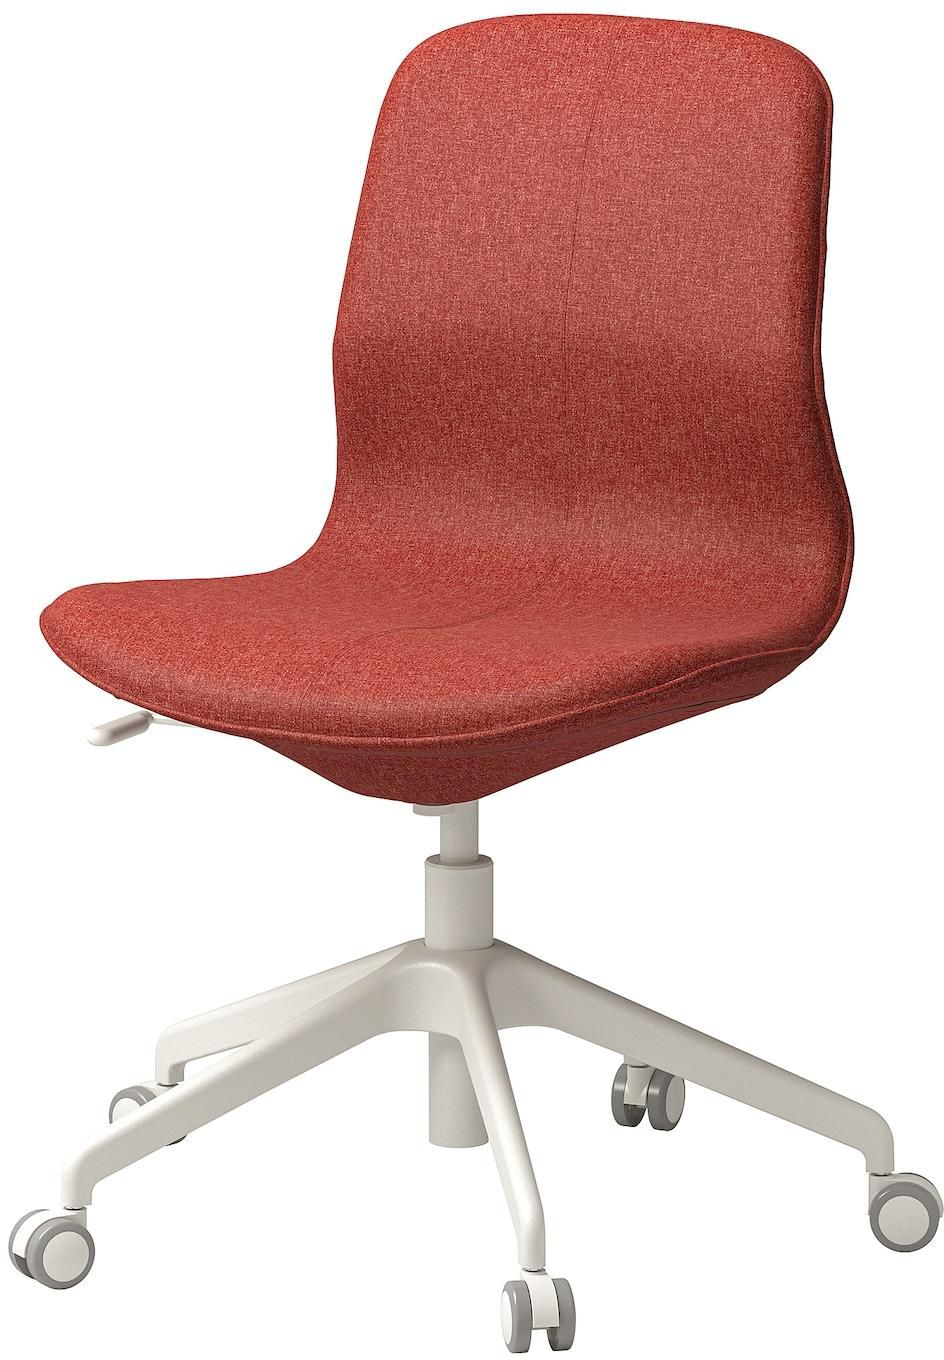 LÅNGFJÄLL Conference chair - Gunnared red-orange/white